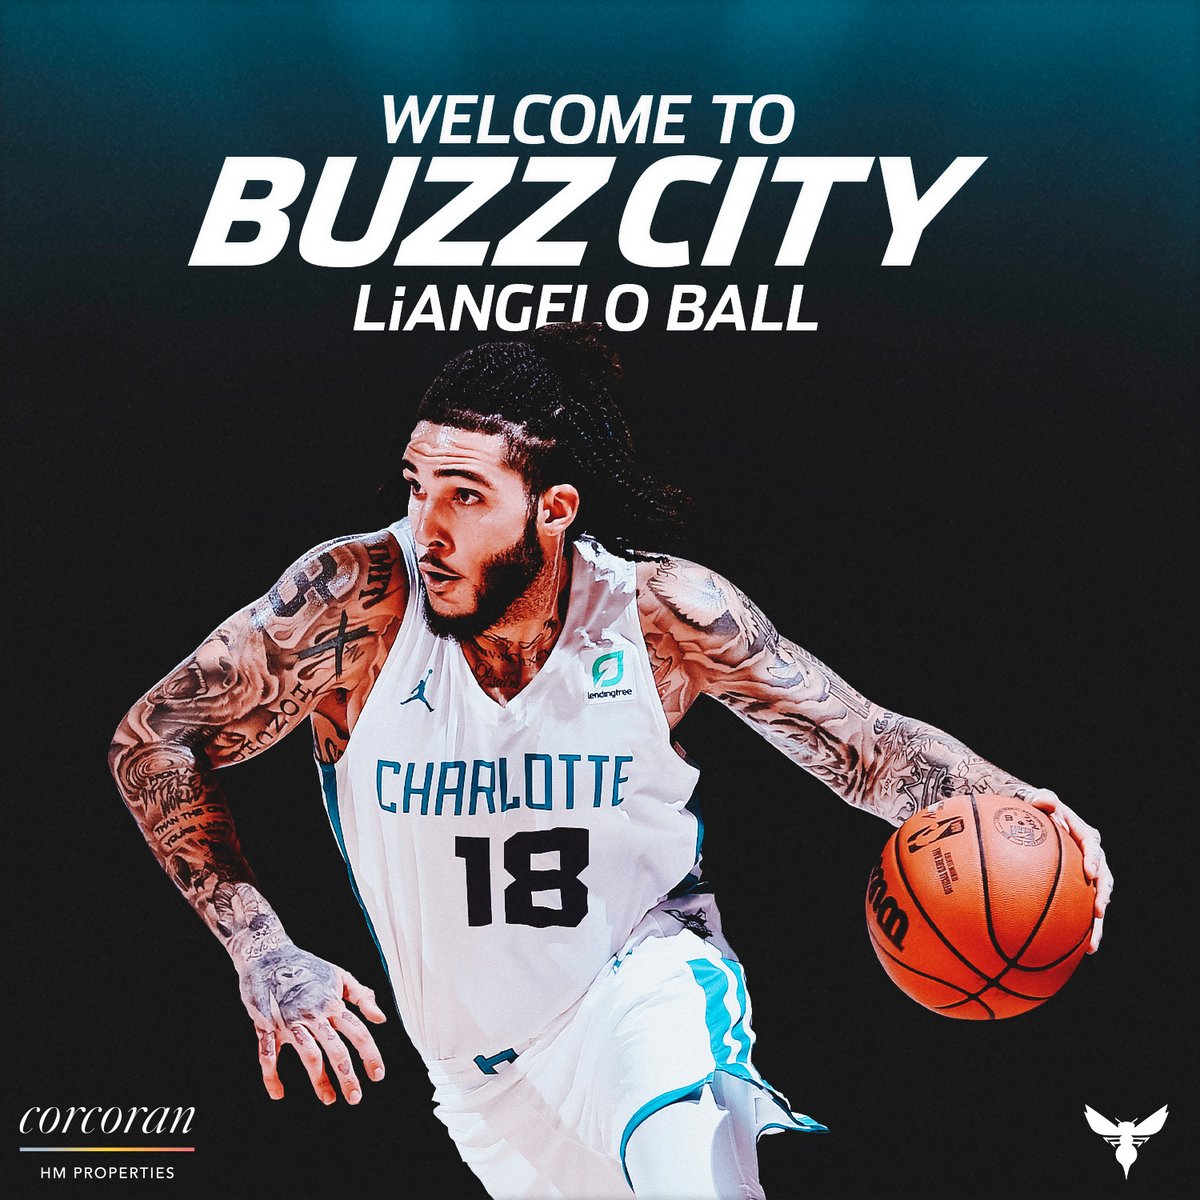 OFFICIAL: We have signed free agent guard @LiAngeloBall.

on.nba.com/3xTU6al | @CorcoranHM